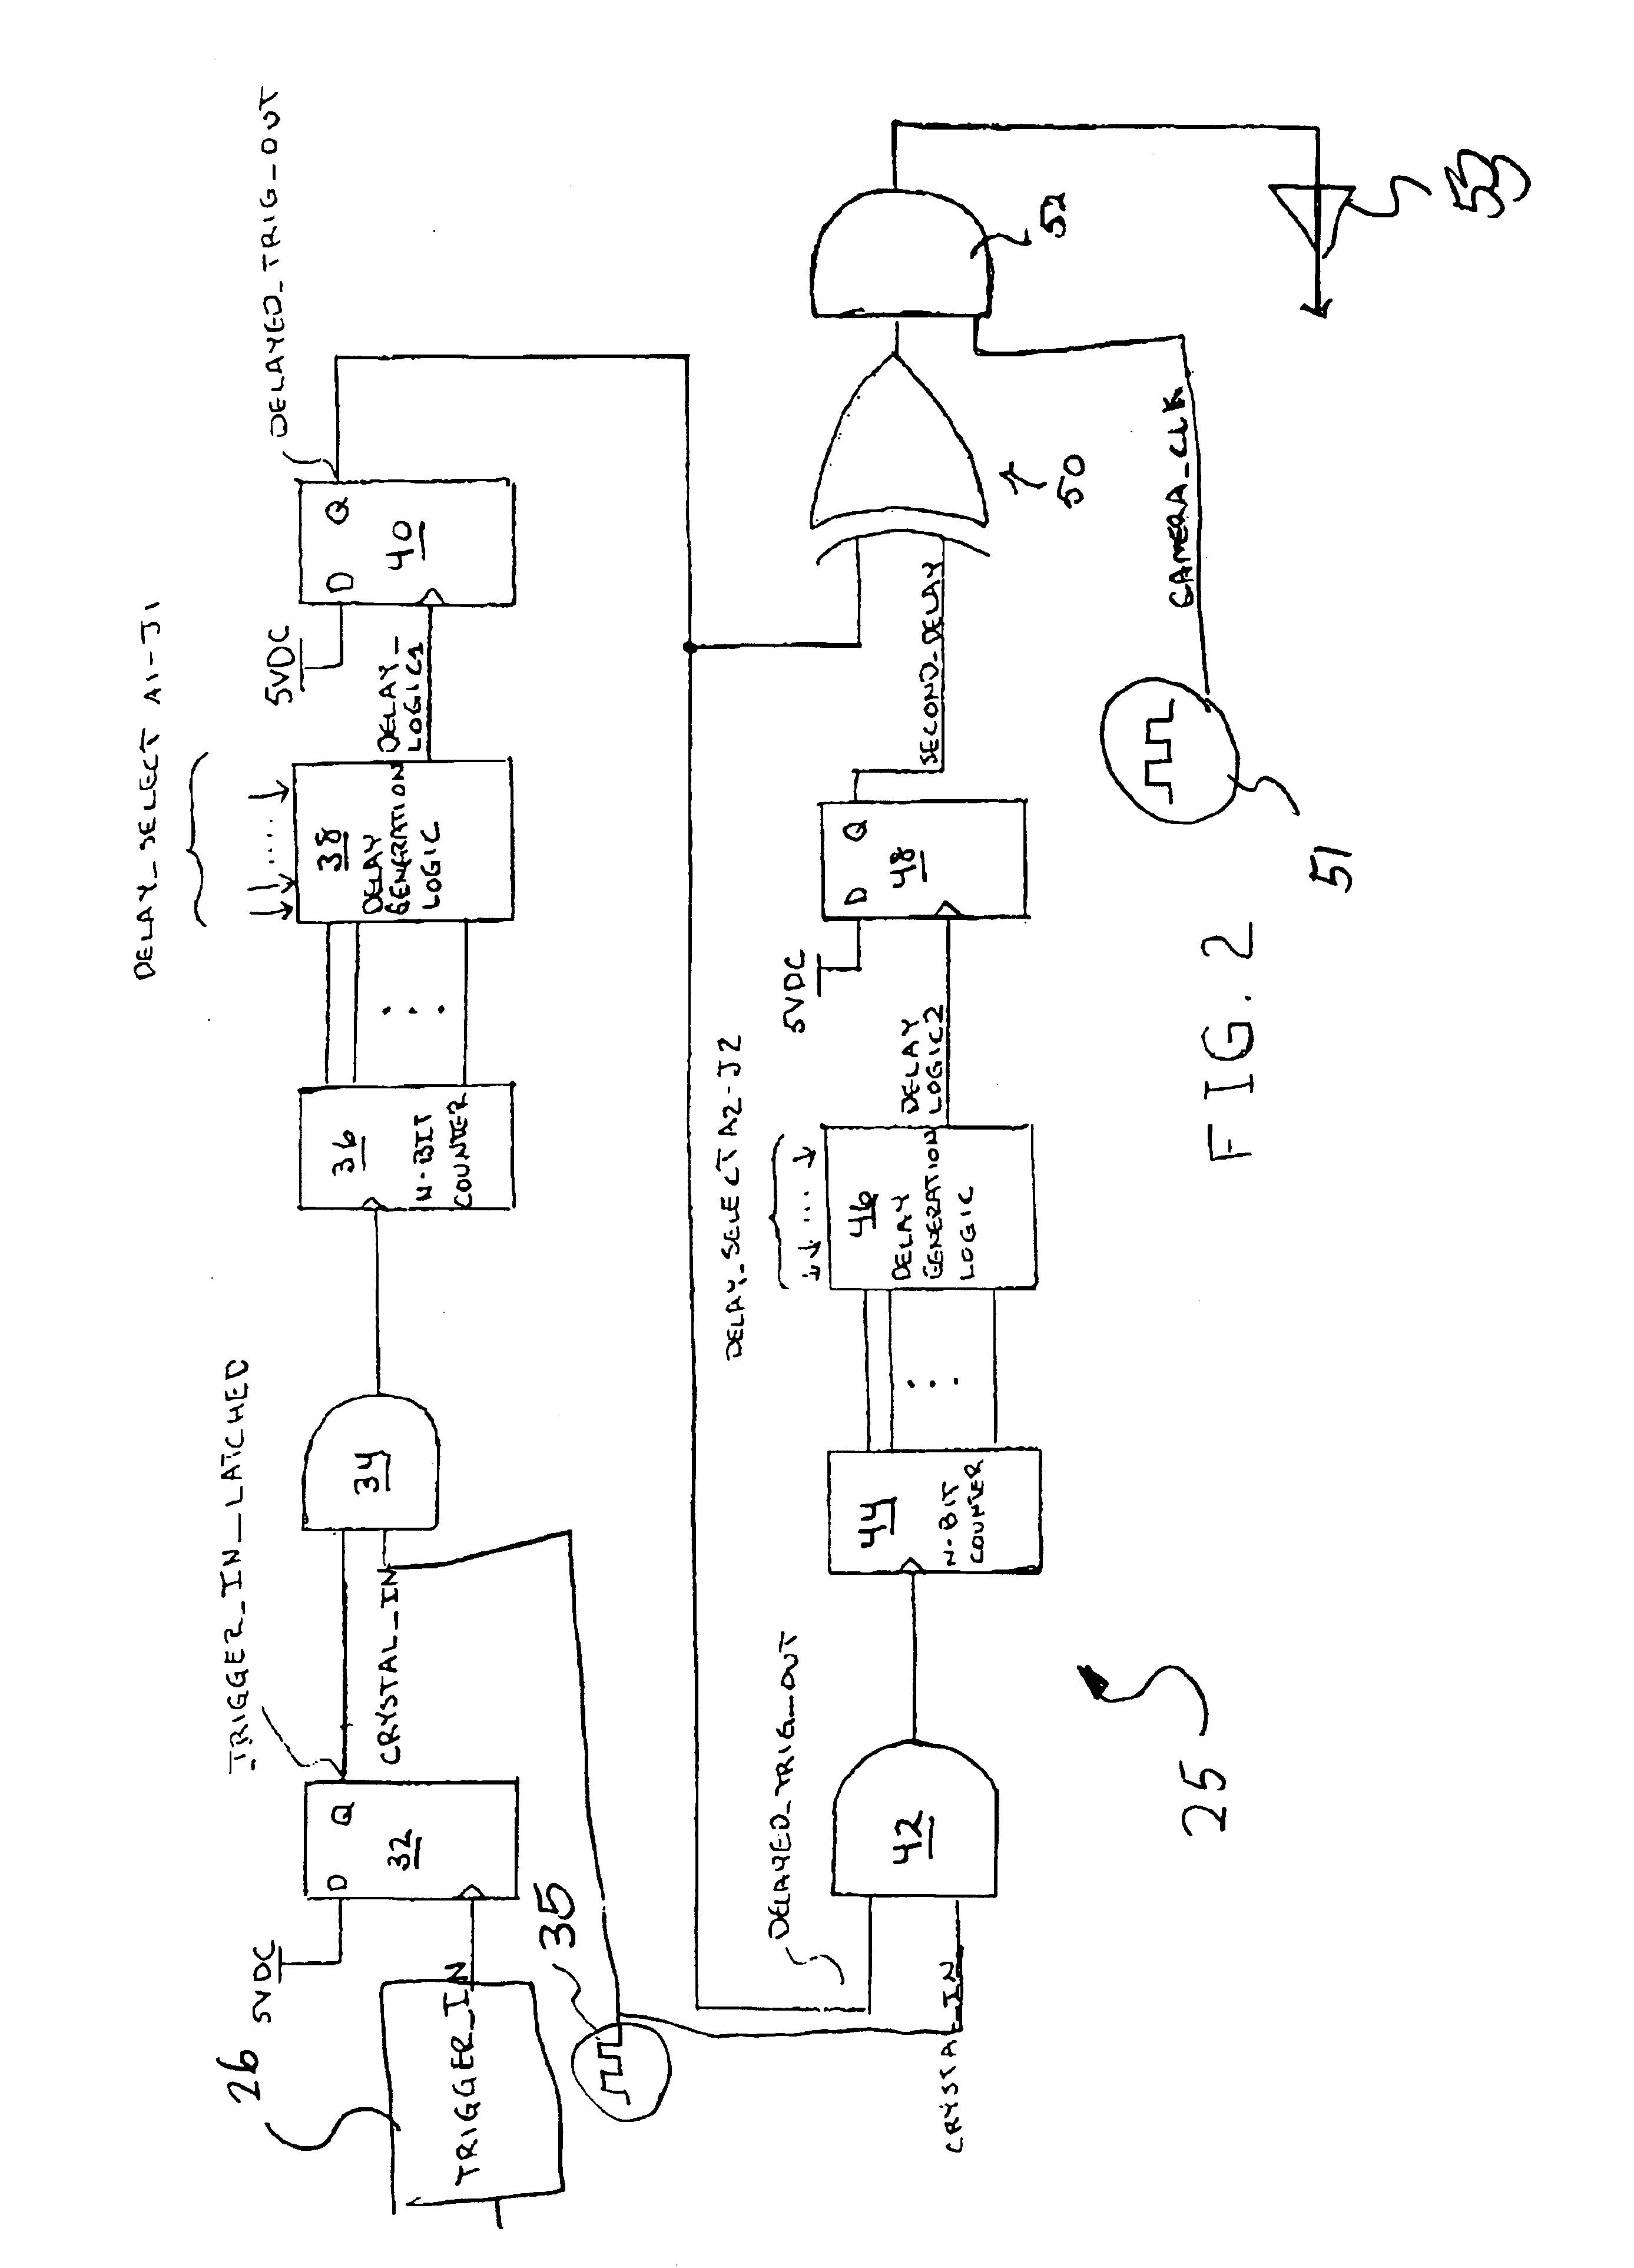 Control circuitry for high speed video camera operation